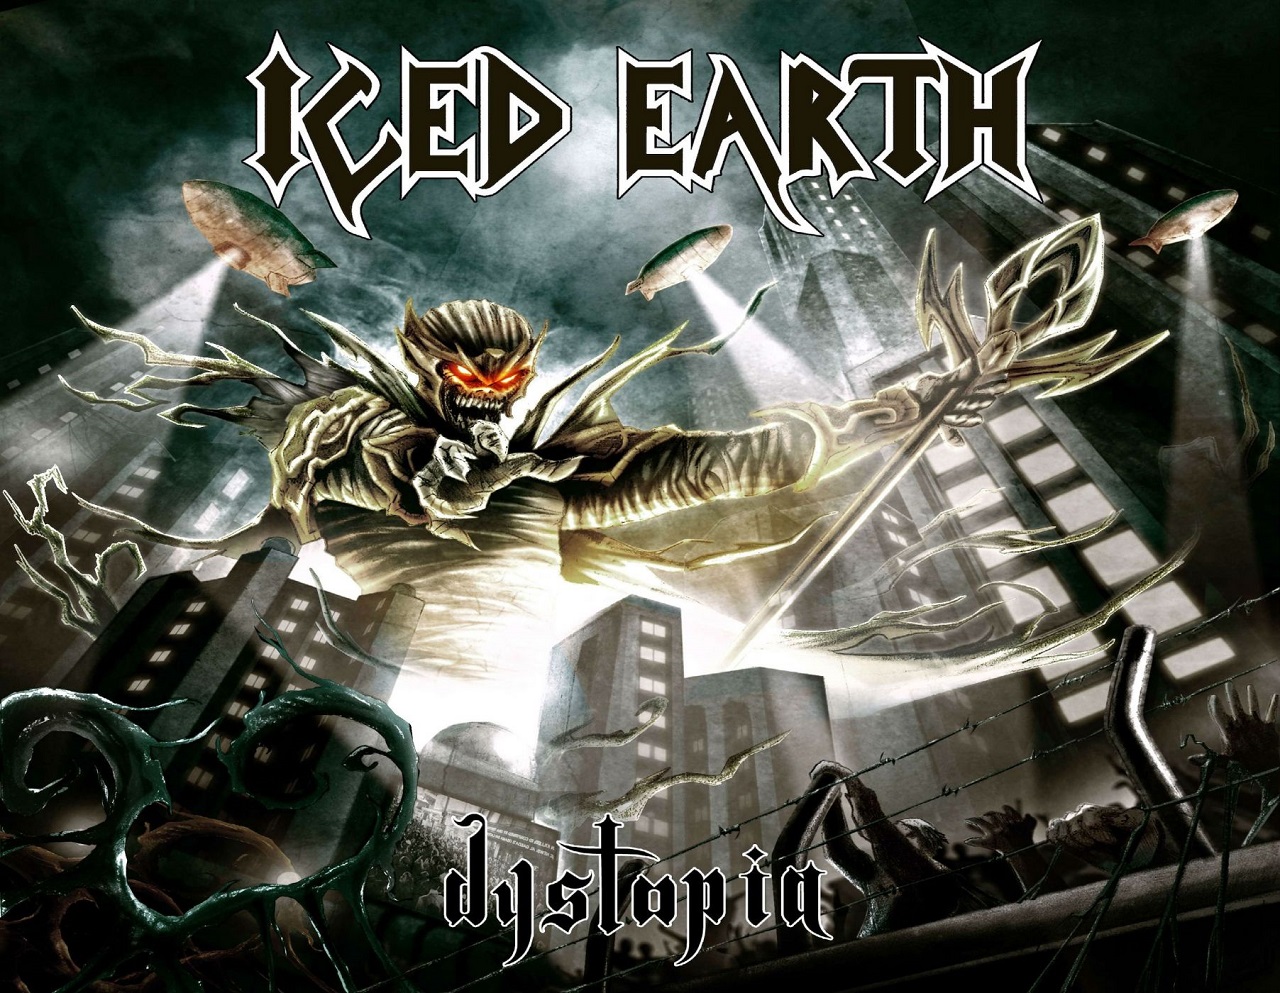 General 1280x993 Iced Earth band power metal heavy metal